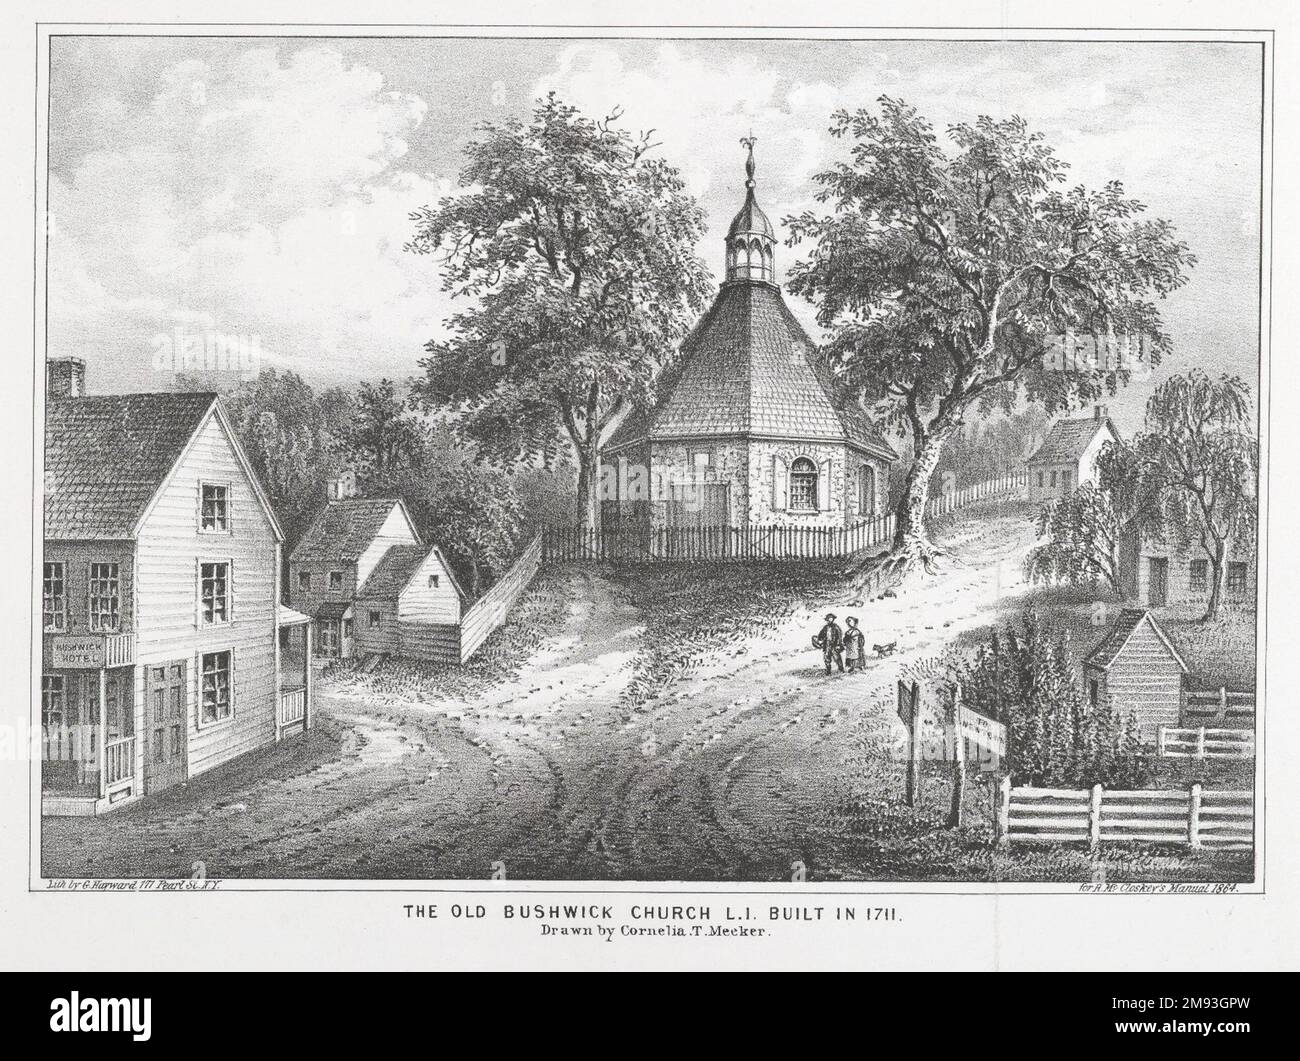 The Old Bushwick Church L.I. Built in 1711 G. Hayward. , 1864. Lithograph  The First Dutch Reformed Church, pictured here, was constructed in the town of Bushwick (north of the town of Brooklyn) in the octagonal shape typical of Protestant churches in the Netherlands. This church was an important center of civic life, helping to preserve Dutch language and culture for its congregation. In the middle of the nineteenth century, both nostalgic and antiquarian interest in the region’s past fostered a demand for images of historic buildings, including this one, which had been destroyed in 1828. Ame Stock Photo